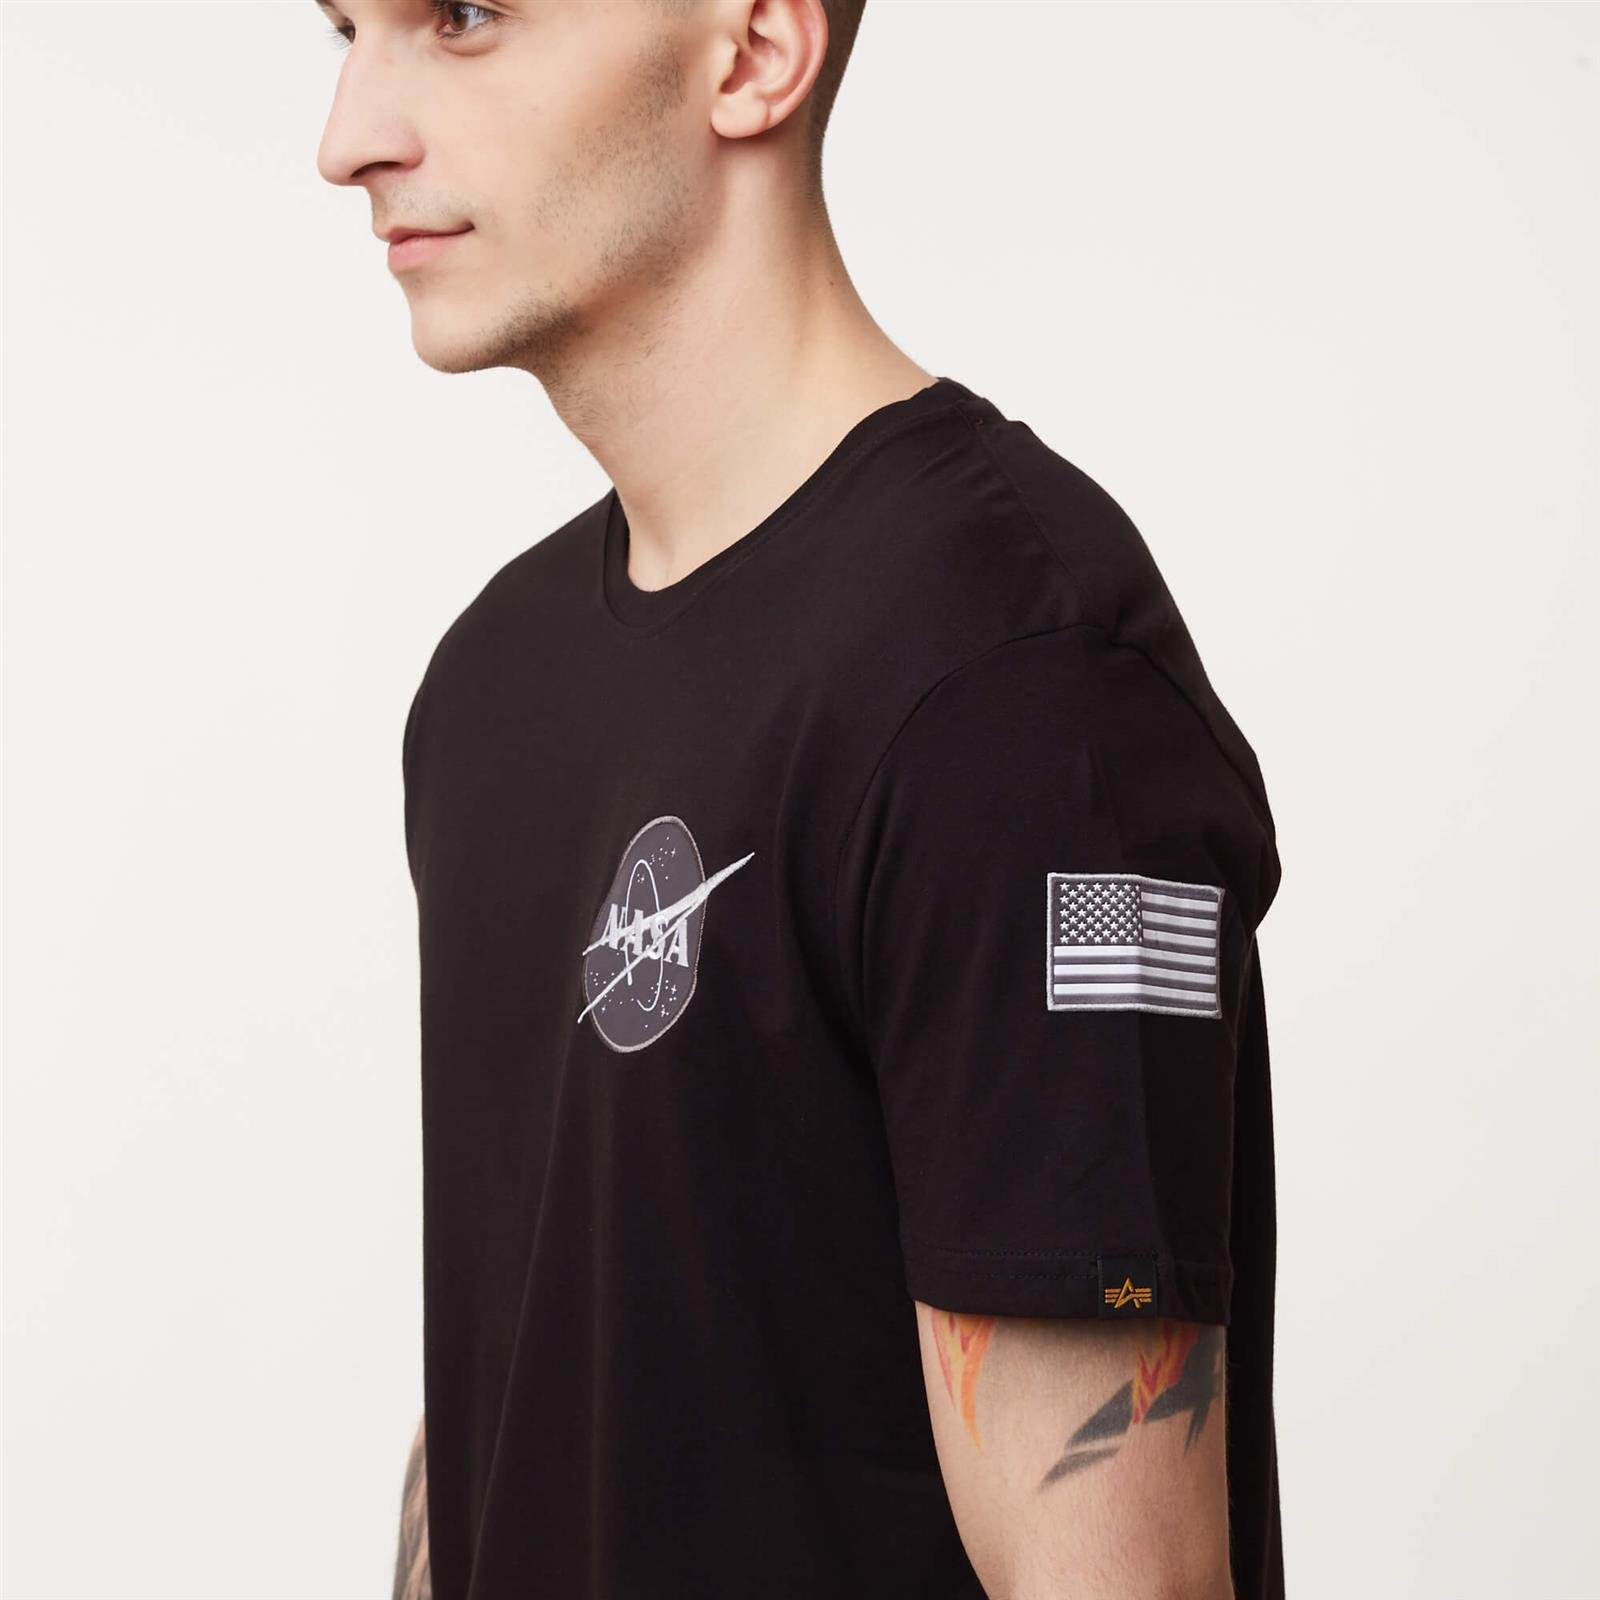 Ellesse \\ clothing brands | Men\'s Brands Alpha T-shirts Shuttle \\ BLACK Men \\ Alpha Men clothing #Brands Space Industries \\ Industries \\ T #Recommended \\